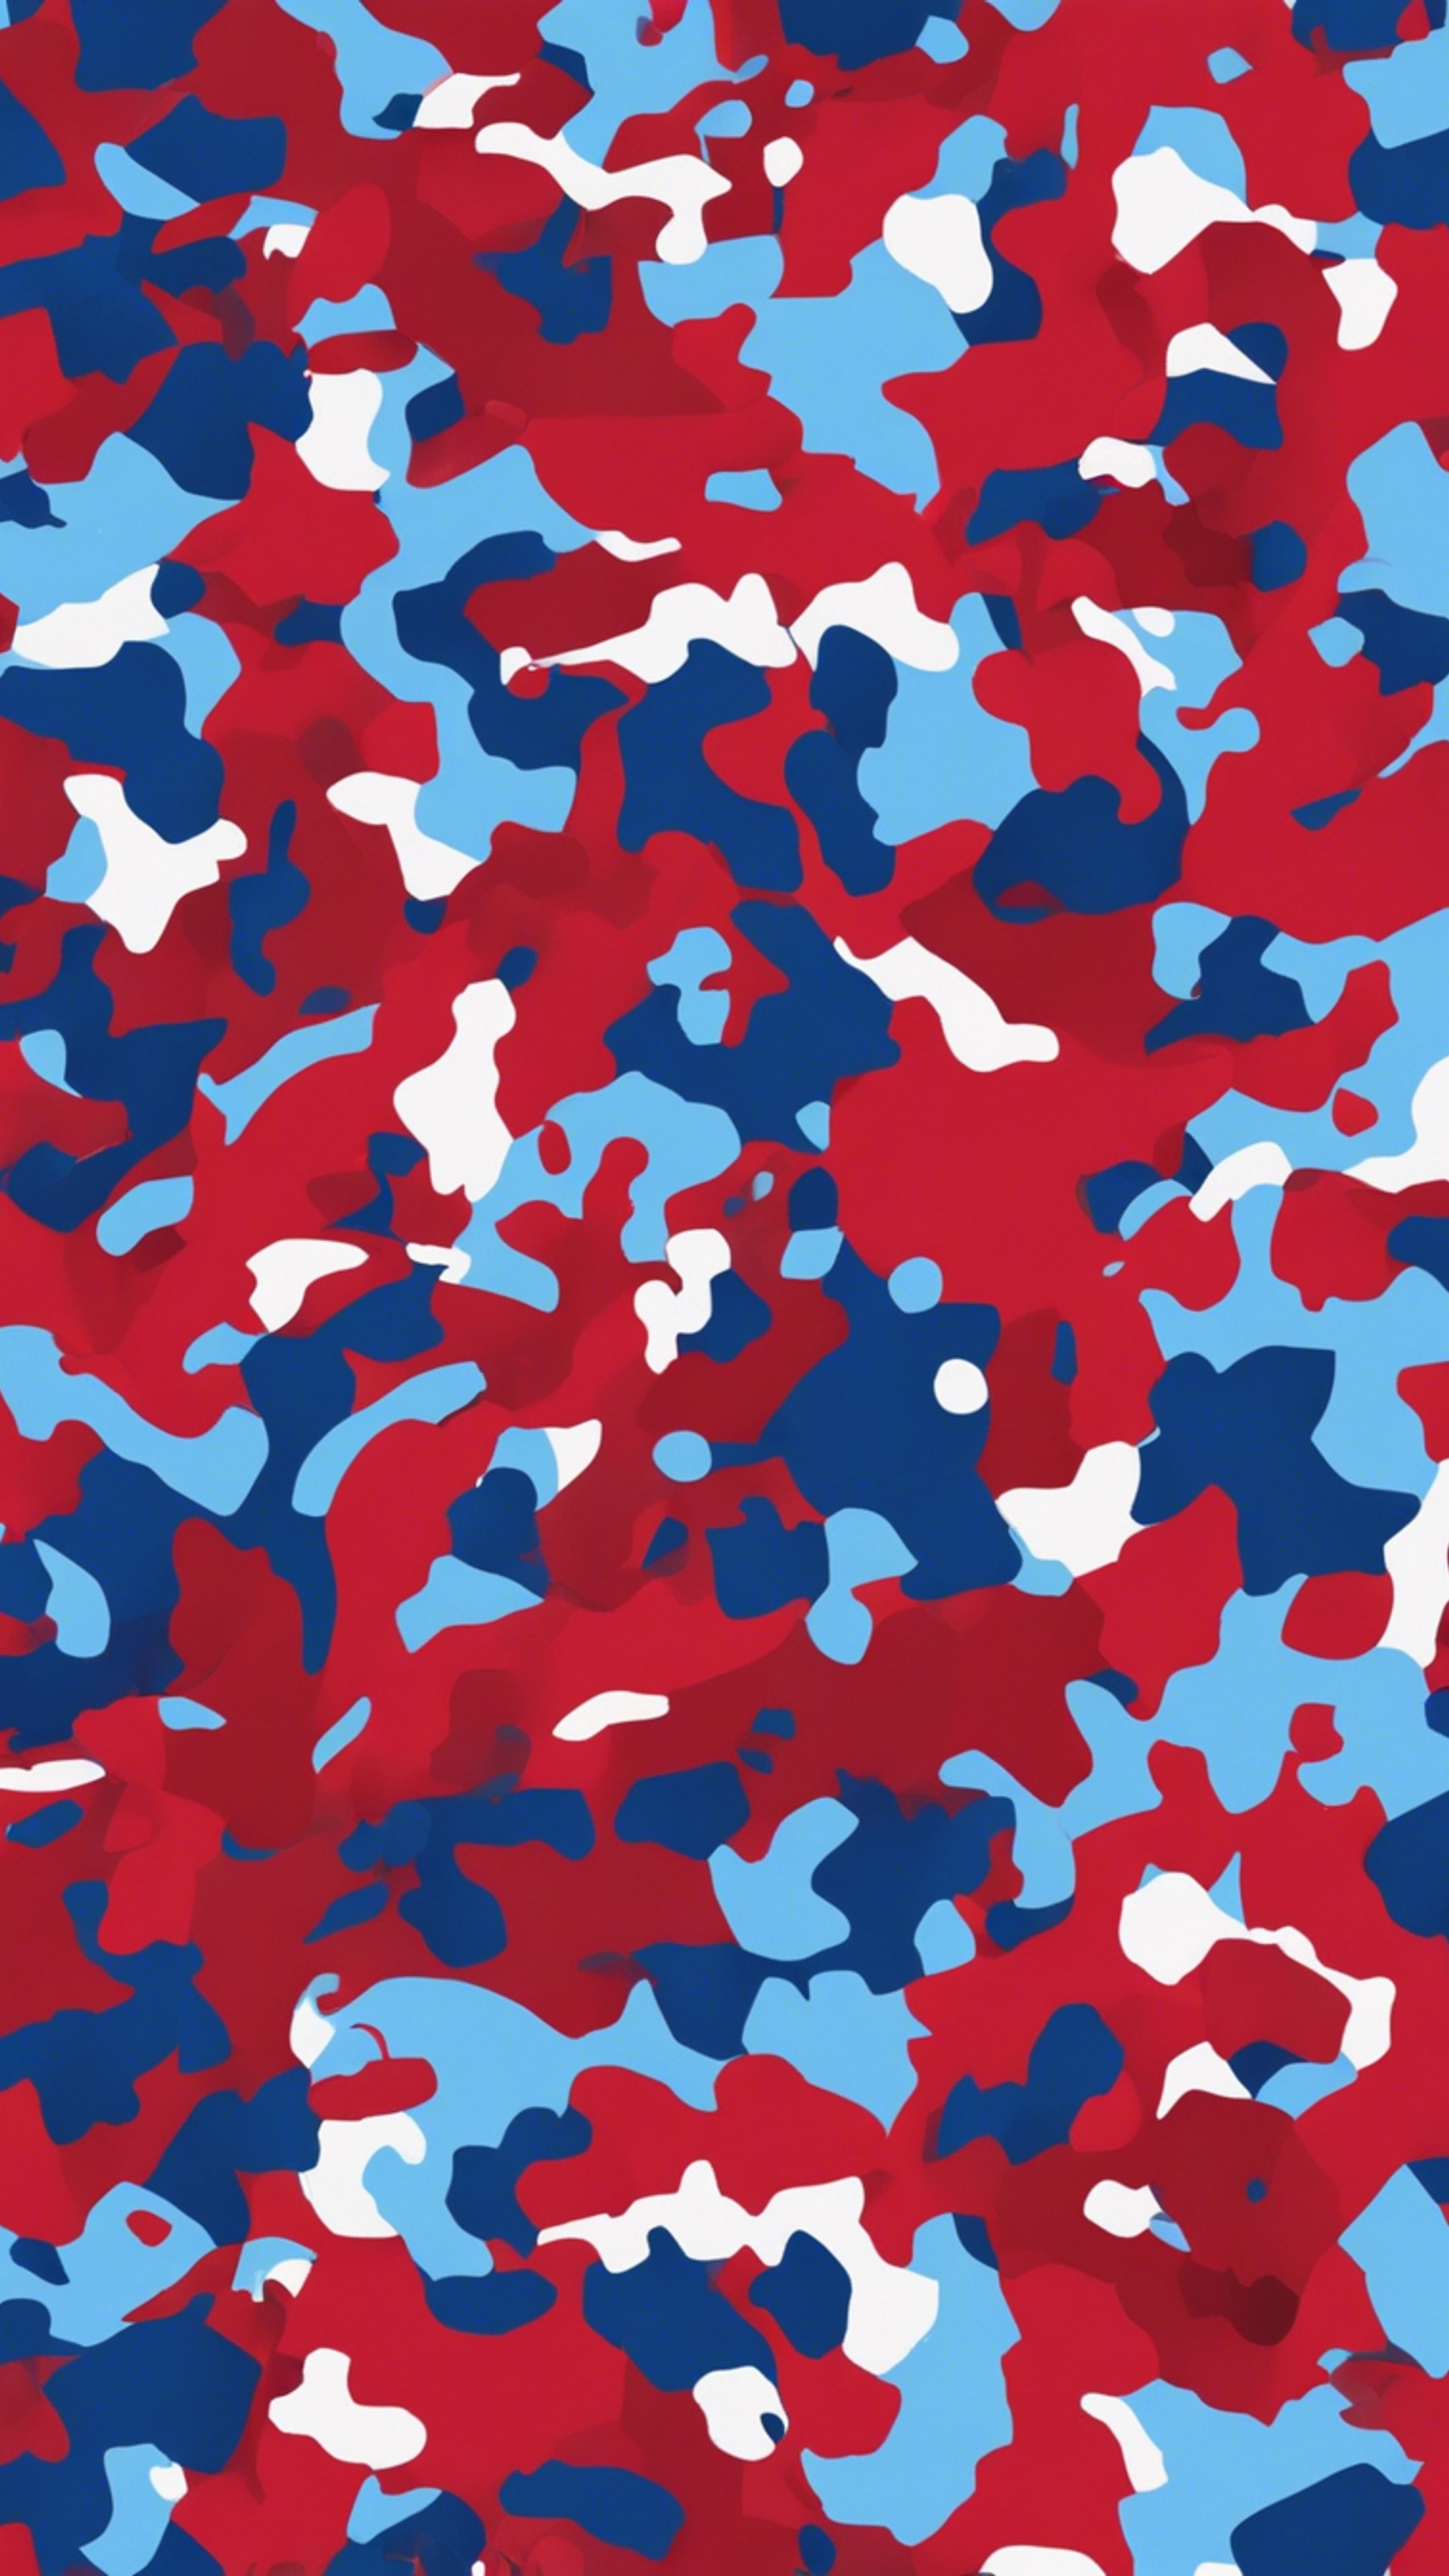 Camouflage pattern in shades of red and blue distributed randomly. Tapet[29e12ceb4fee465f920c]